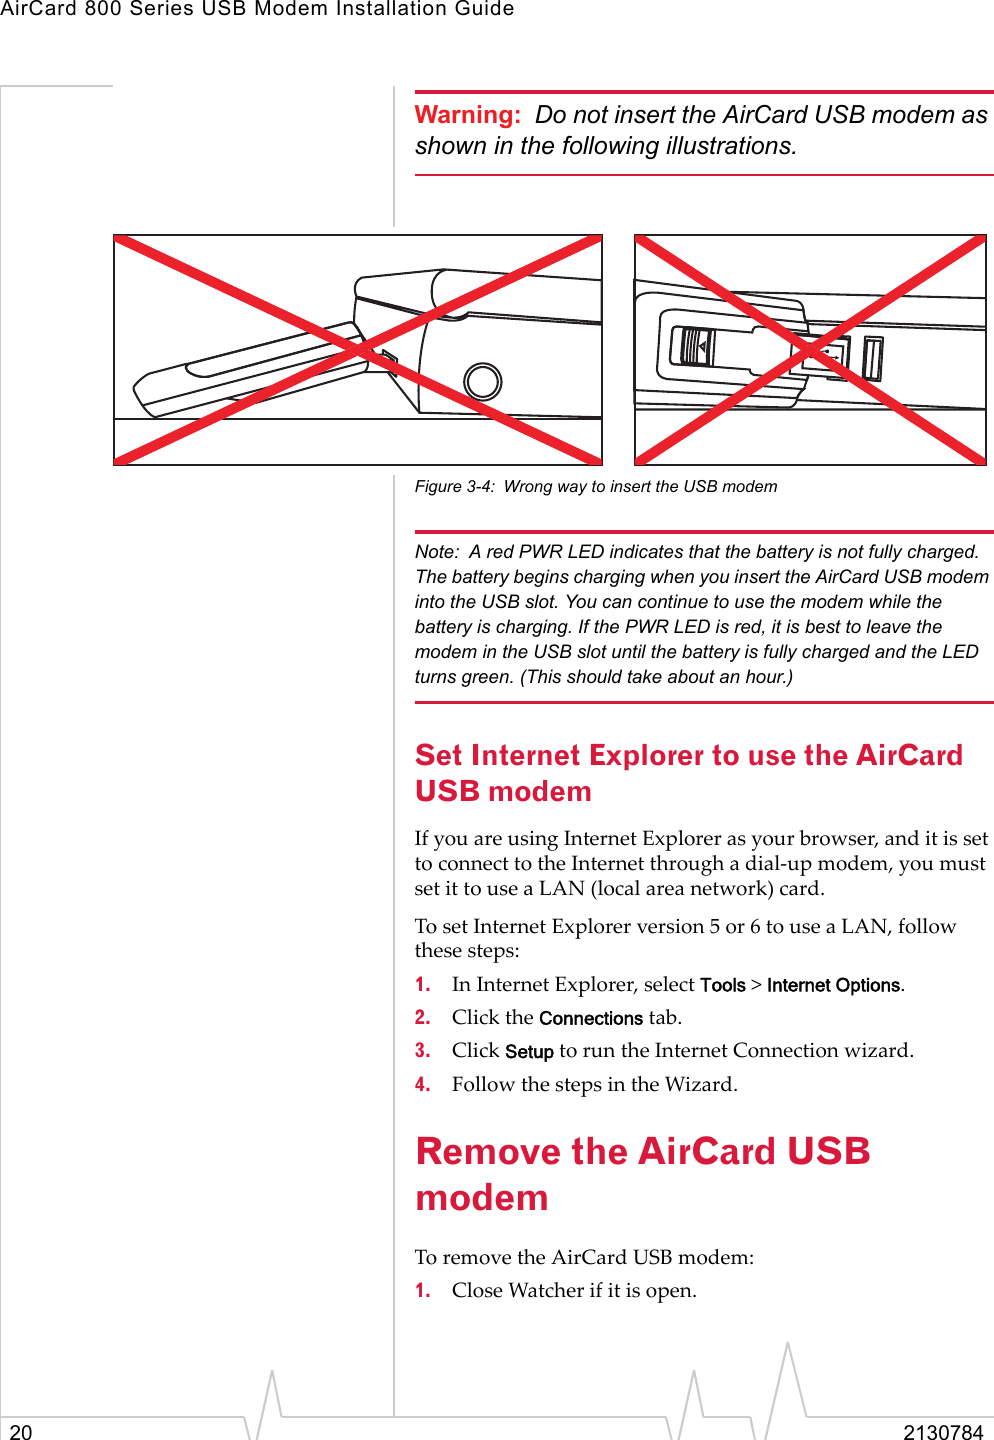 AirCard 800 Series USB Modem Installation Guide20 2130784Warning: Do not insert the AirCard USB modem as shown in the following illustrations.Figure 3-4: Wrong way to insert the USB modemNote: A red PWR LED indicates that the battery is not fully charged. The battery begins charging when you insert the AirCard USB modem into the USB slot. You can continue to use the modem while the battery is charging. If the PWR LED is red, it is best to leave the modem in the USB slot until the battery is fully charged and the LED turns green. (This should take about an hour.)Set Internet Explorer to use the AirCard USB modemIf you are using Internet Explorer as your browser, and it is set to connect to the Internet through a dial-up modem, you must set it to use a LAN (local area network) card.To set Internet Explorer version 5 or 6 to use a LAN, follow these steps:1. In Internet Explorer, select Tools &gt; Internet Options.2. Click the Connections tab.3. Click Setup to run the Internet Connection wizard.4. Follow the steps in the Wizard.Remove the AirCard USB modem To remove the AirCard USB modem: 1. Close Watcher if it is open. 